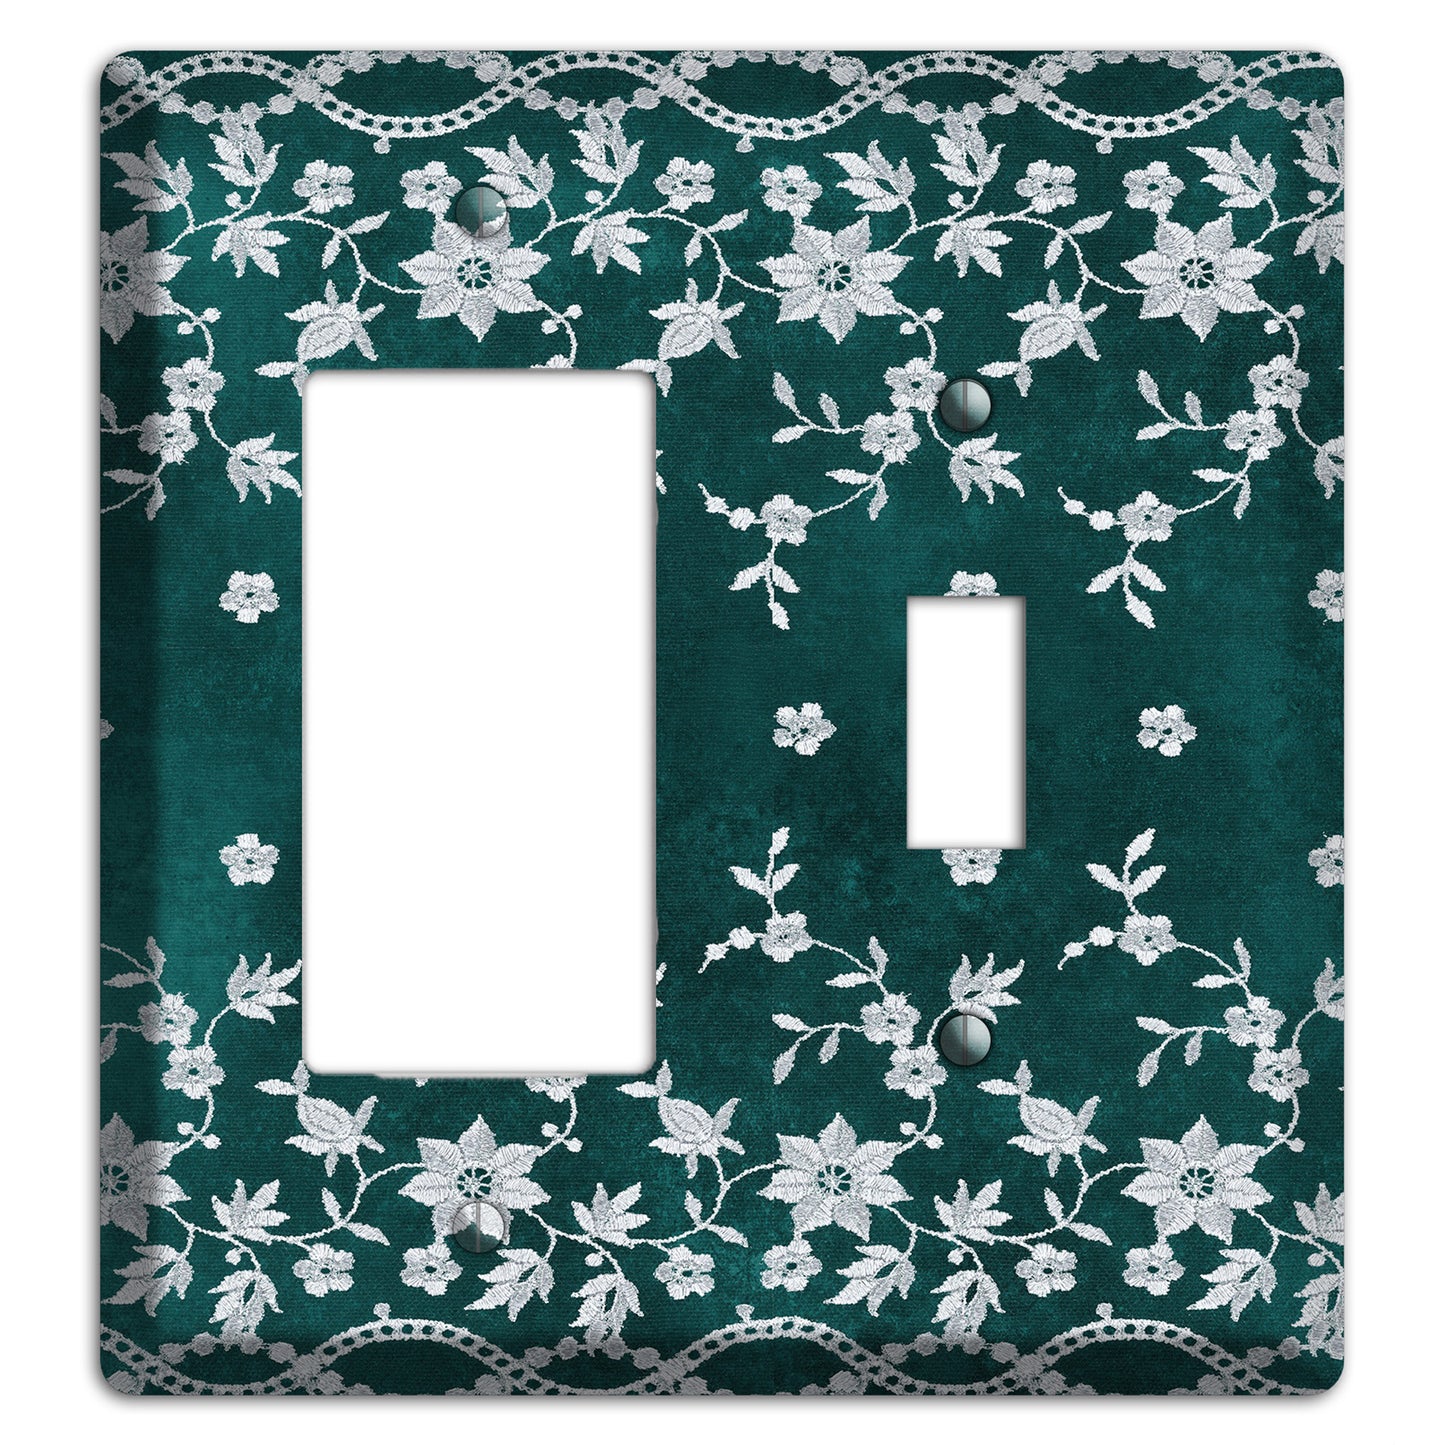 Embroidered Floral Teal Rocker / Toggle Wallplate